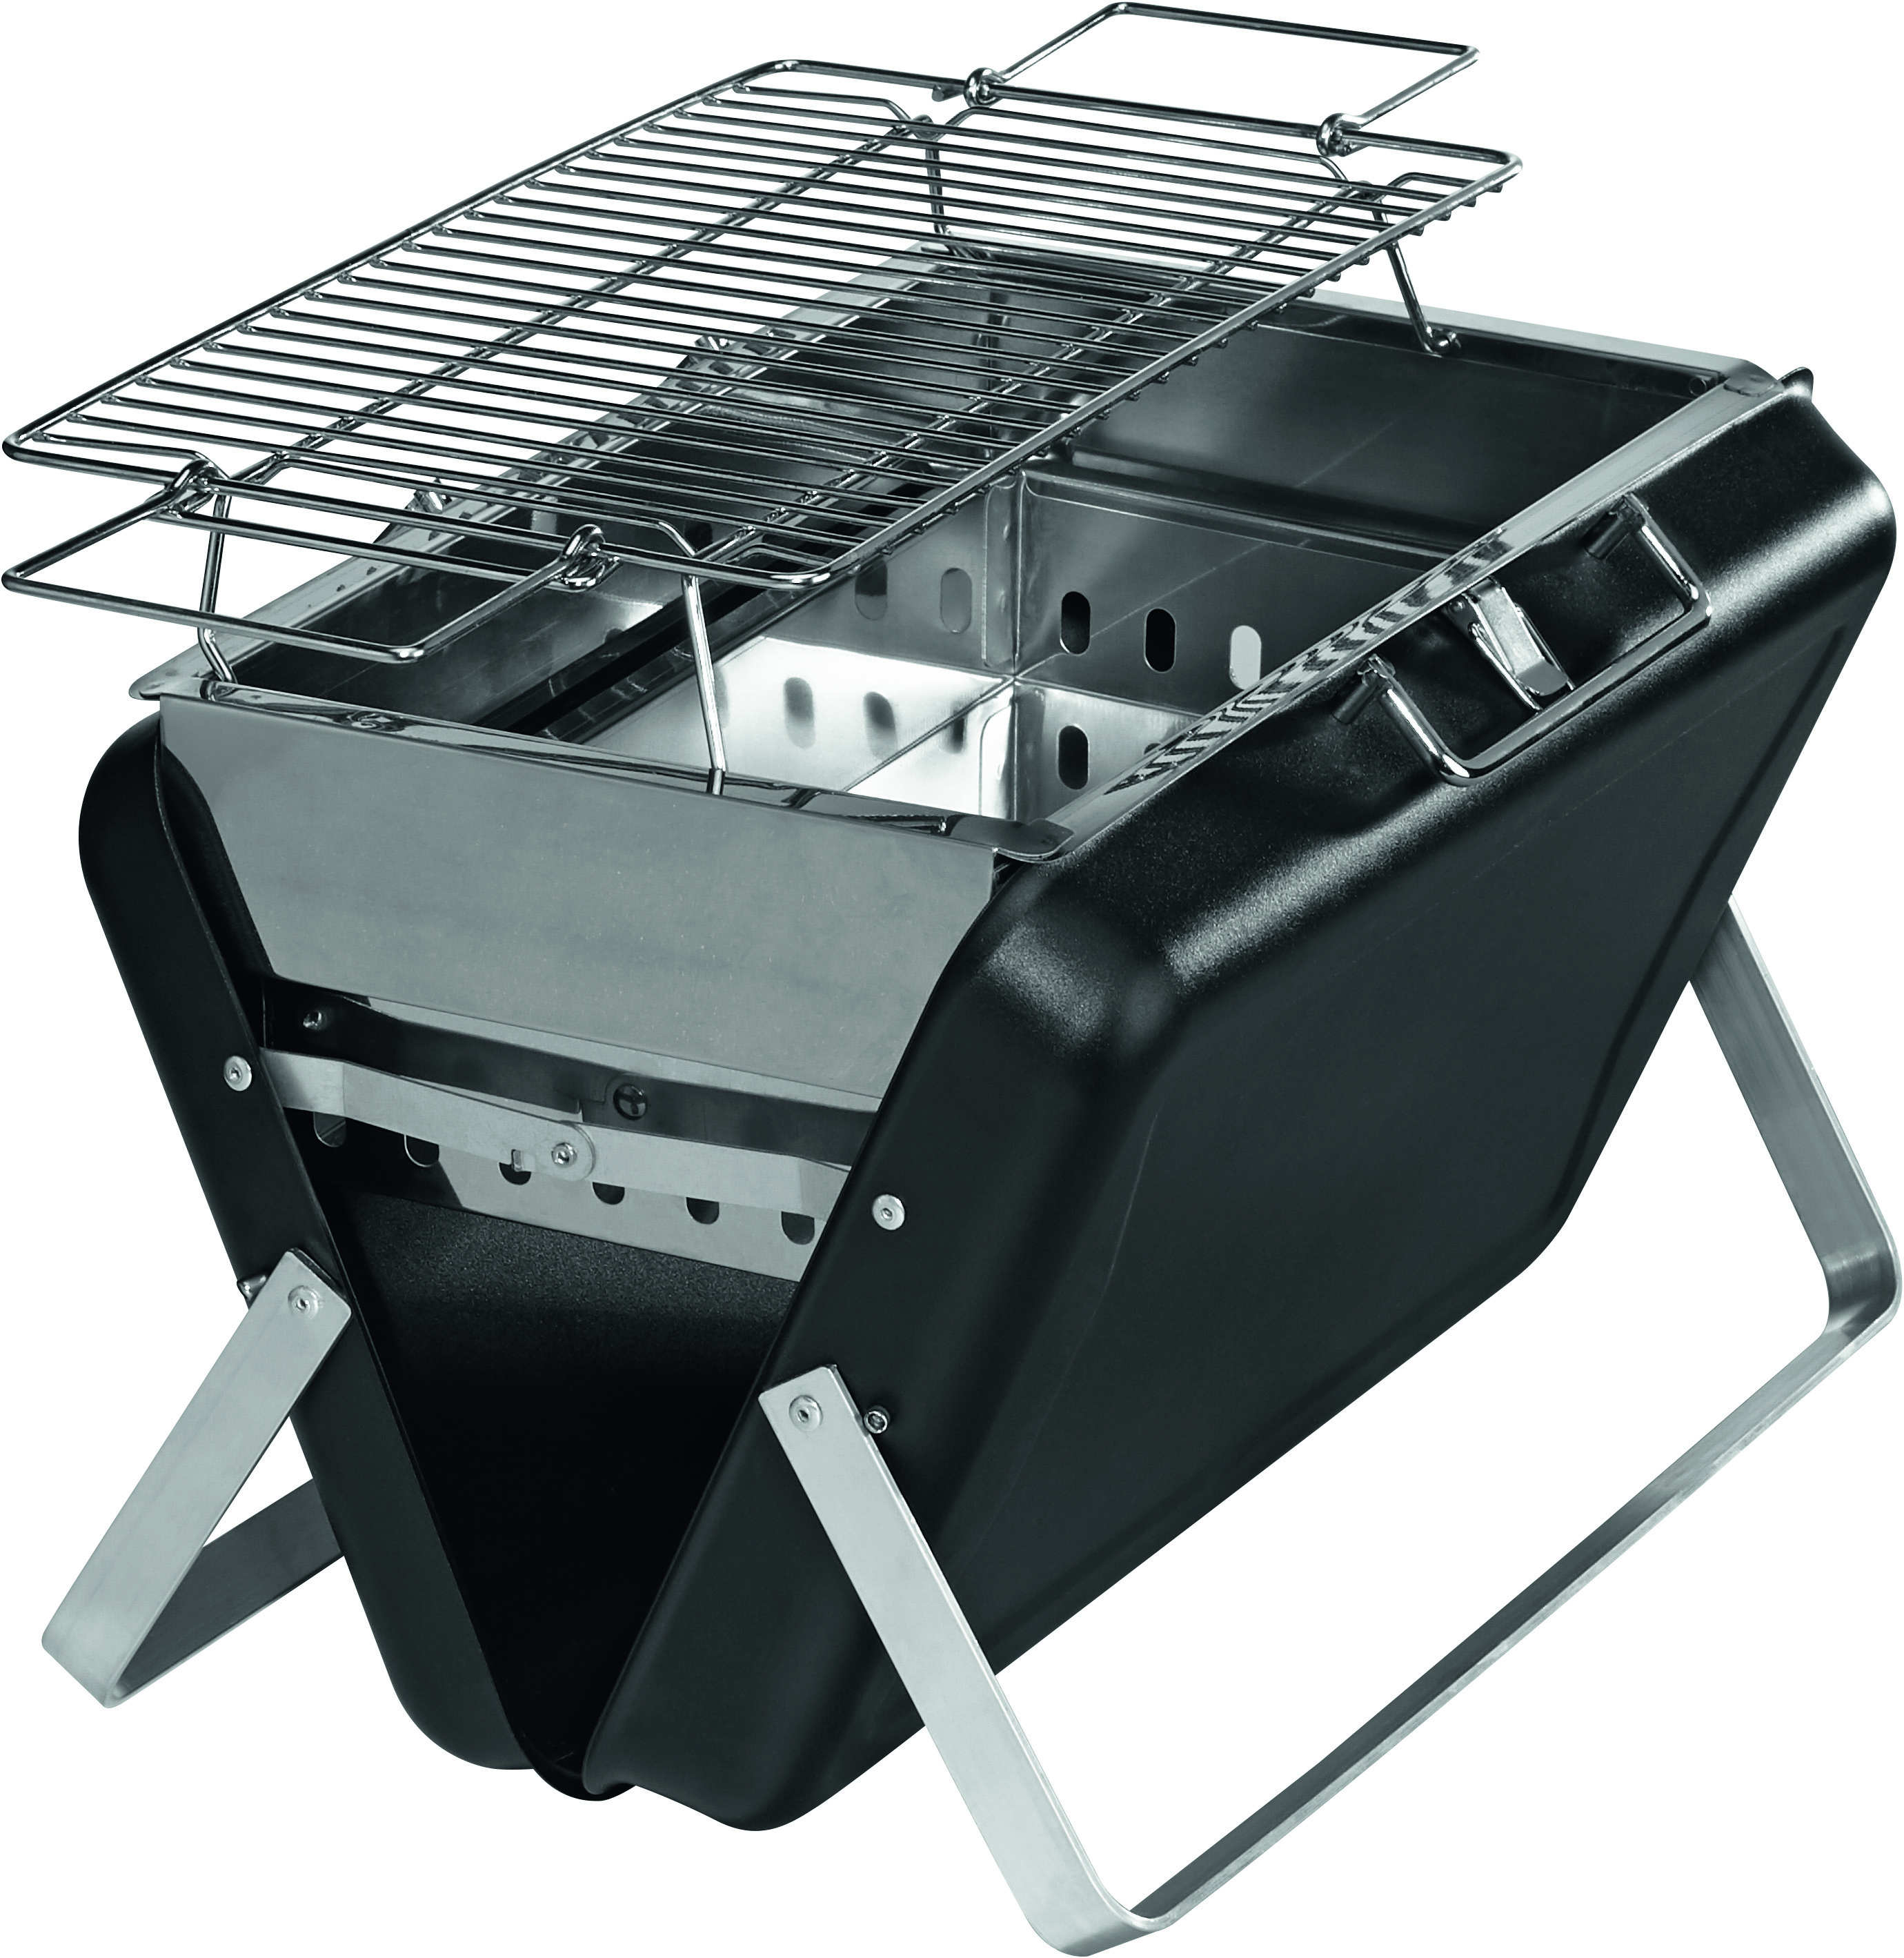 Charcoal barbecue